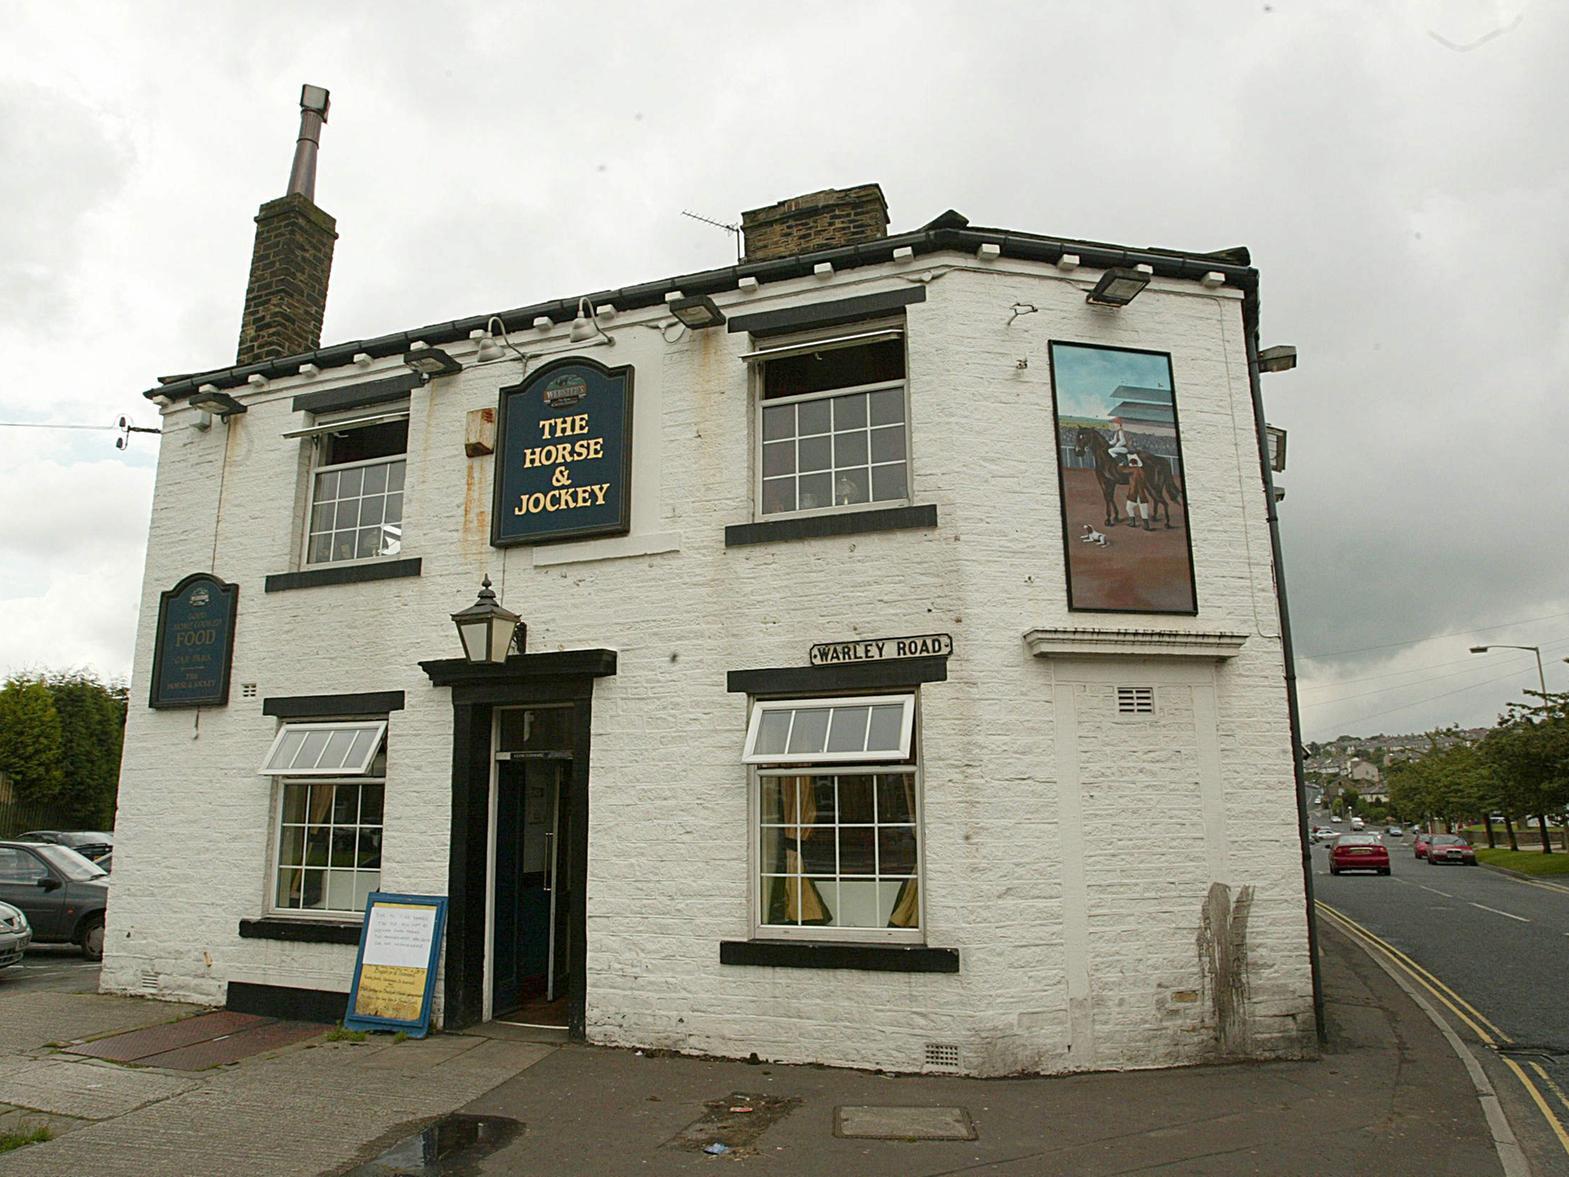 Located on Warley Road, The Horse and Jockey has recently seen plans put in to change the use of the building from a public house to a church